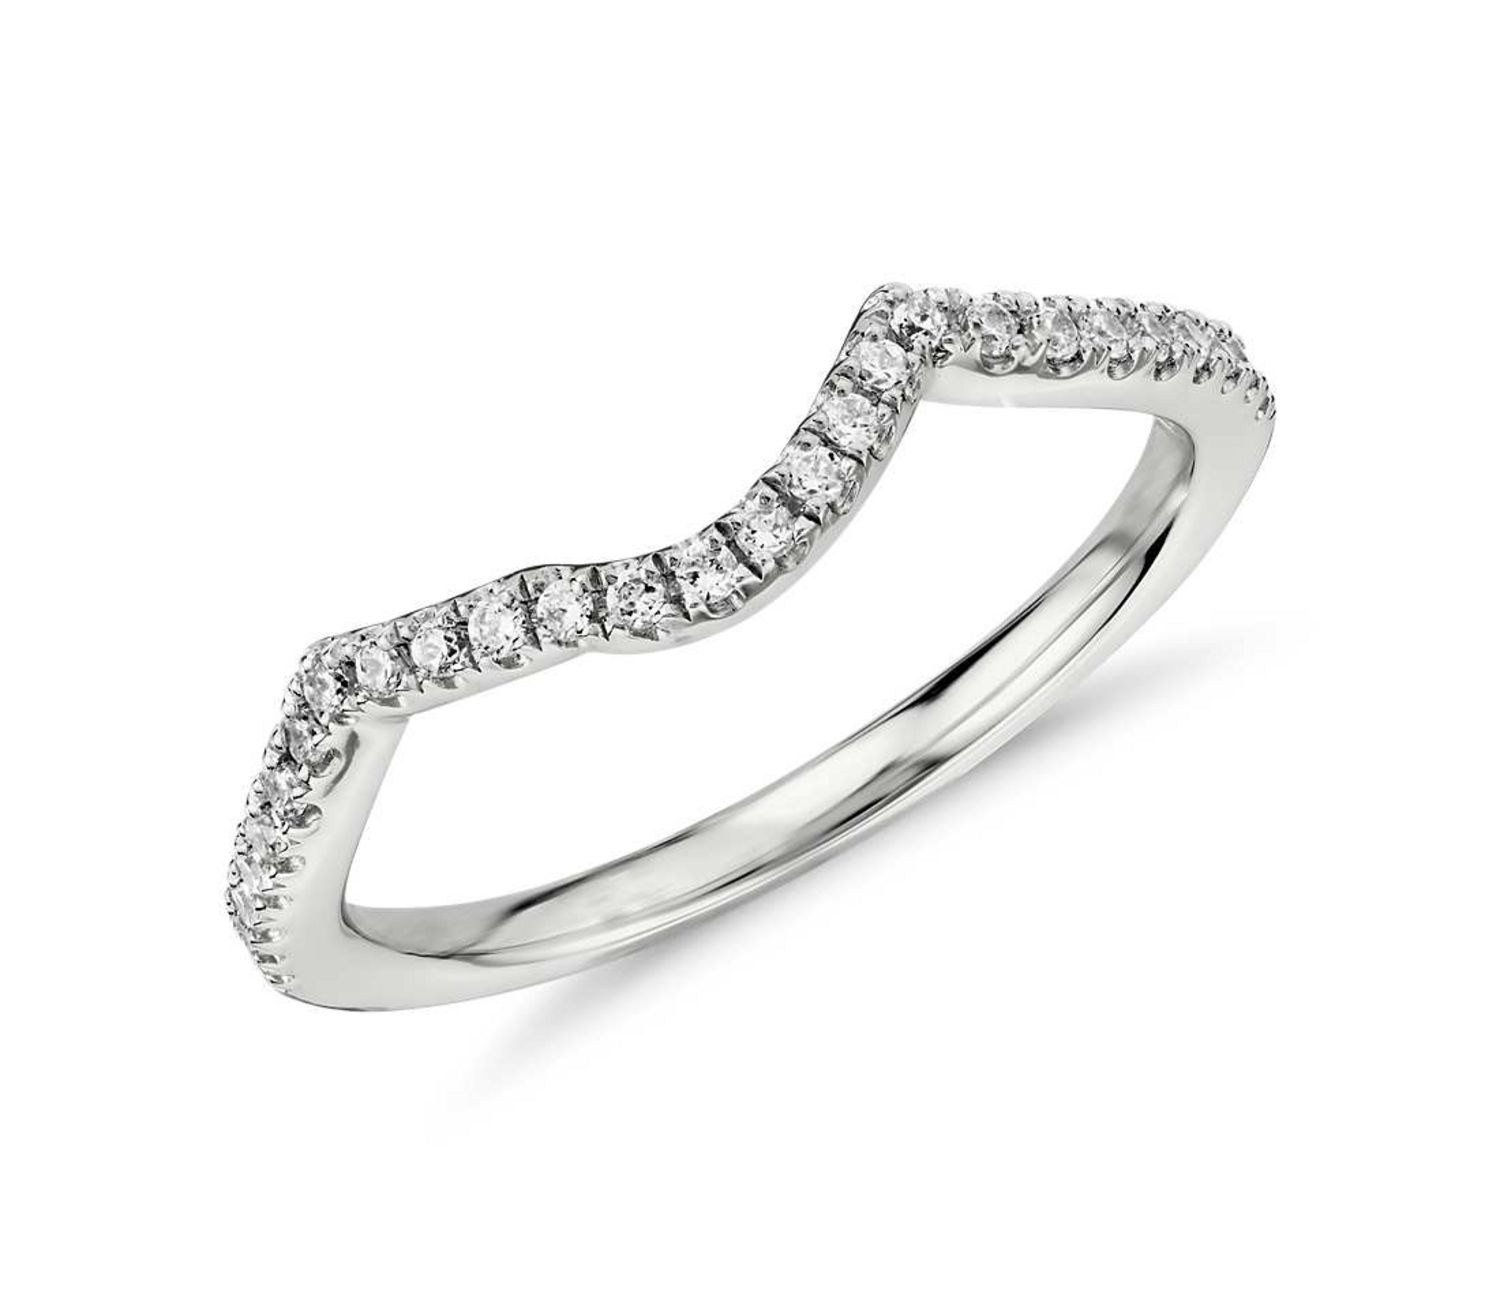 Wedding Rings Under 500
 Unique Wedding Bands Under $500 Diamond Pearl Gold